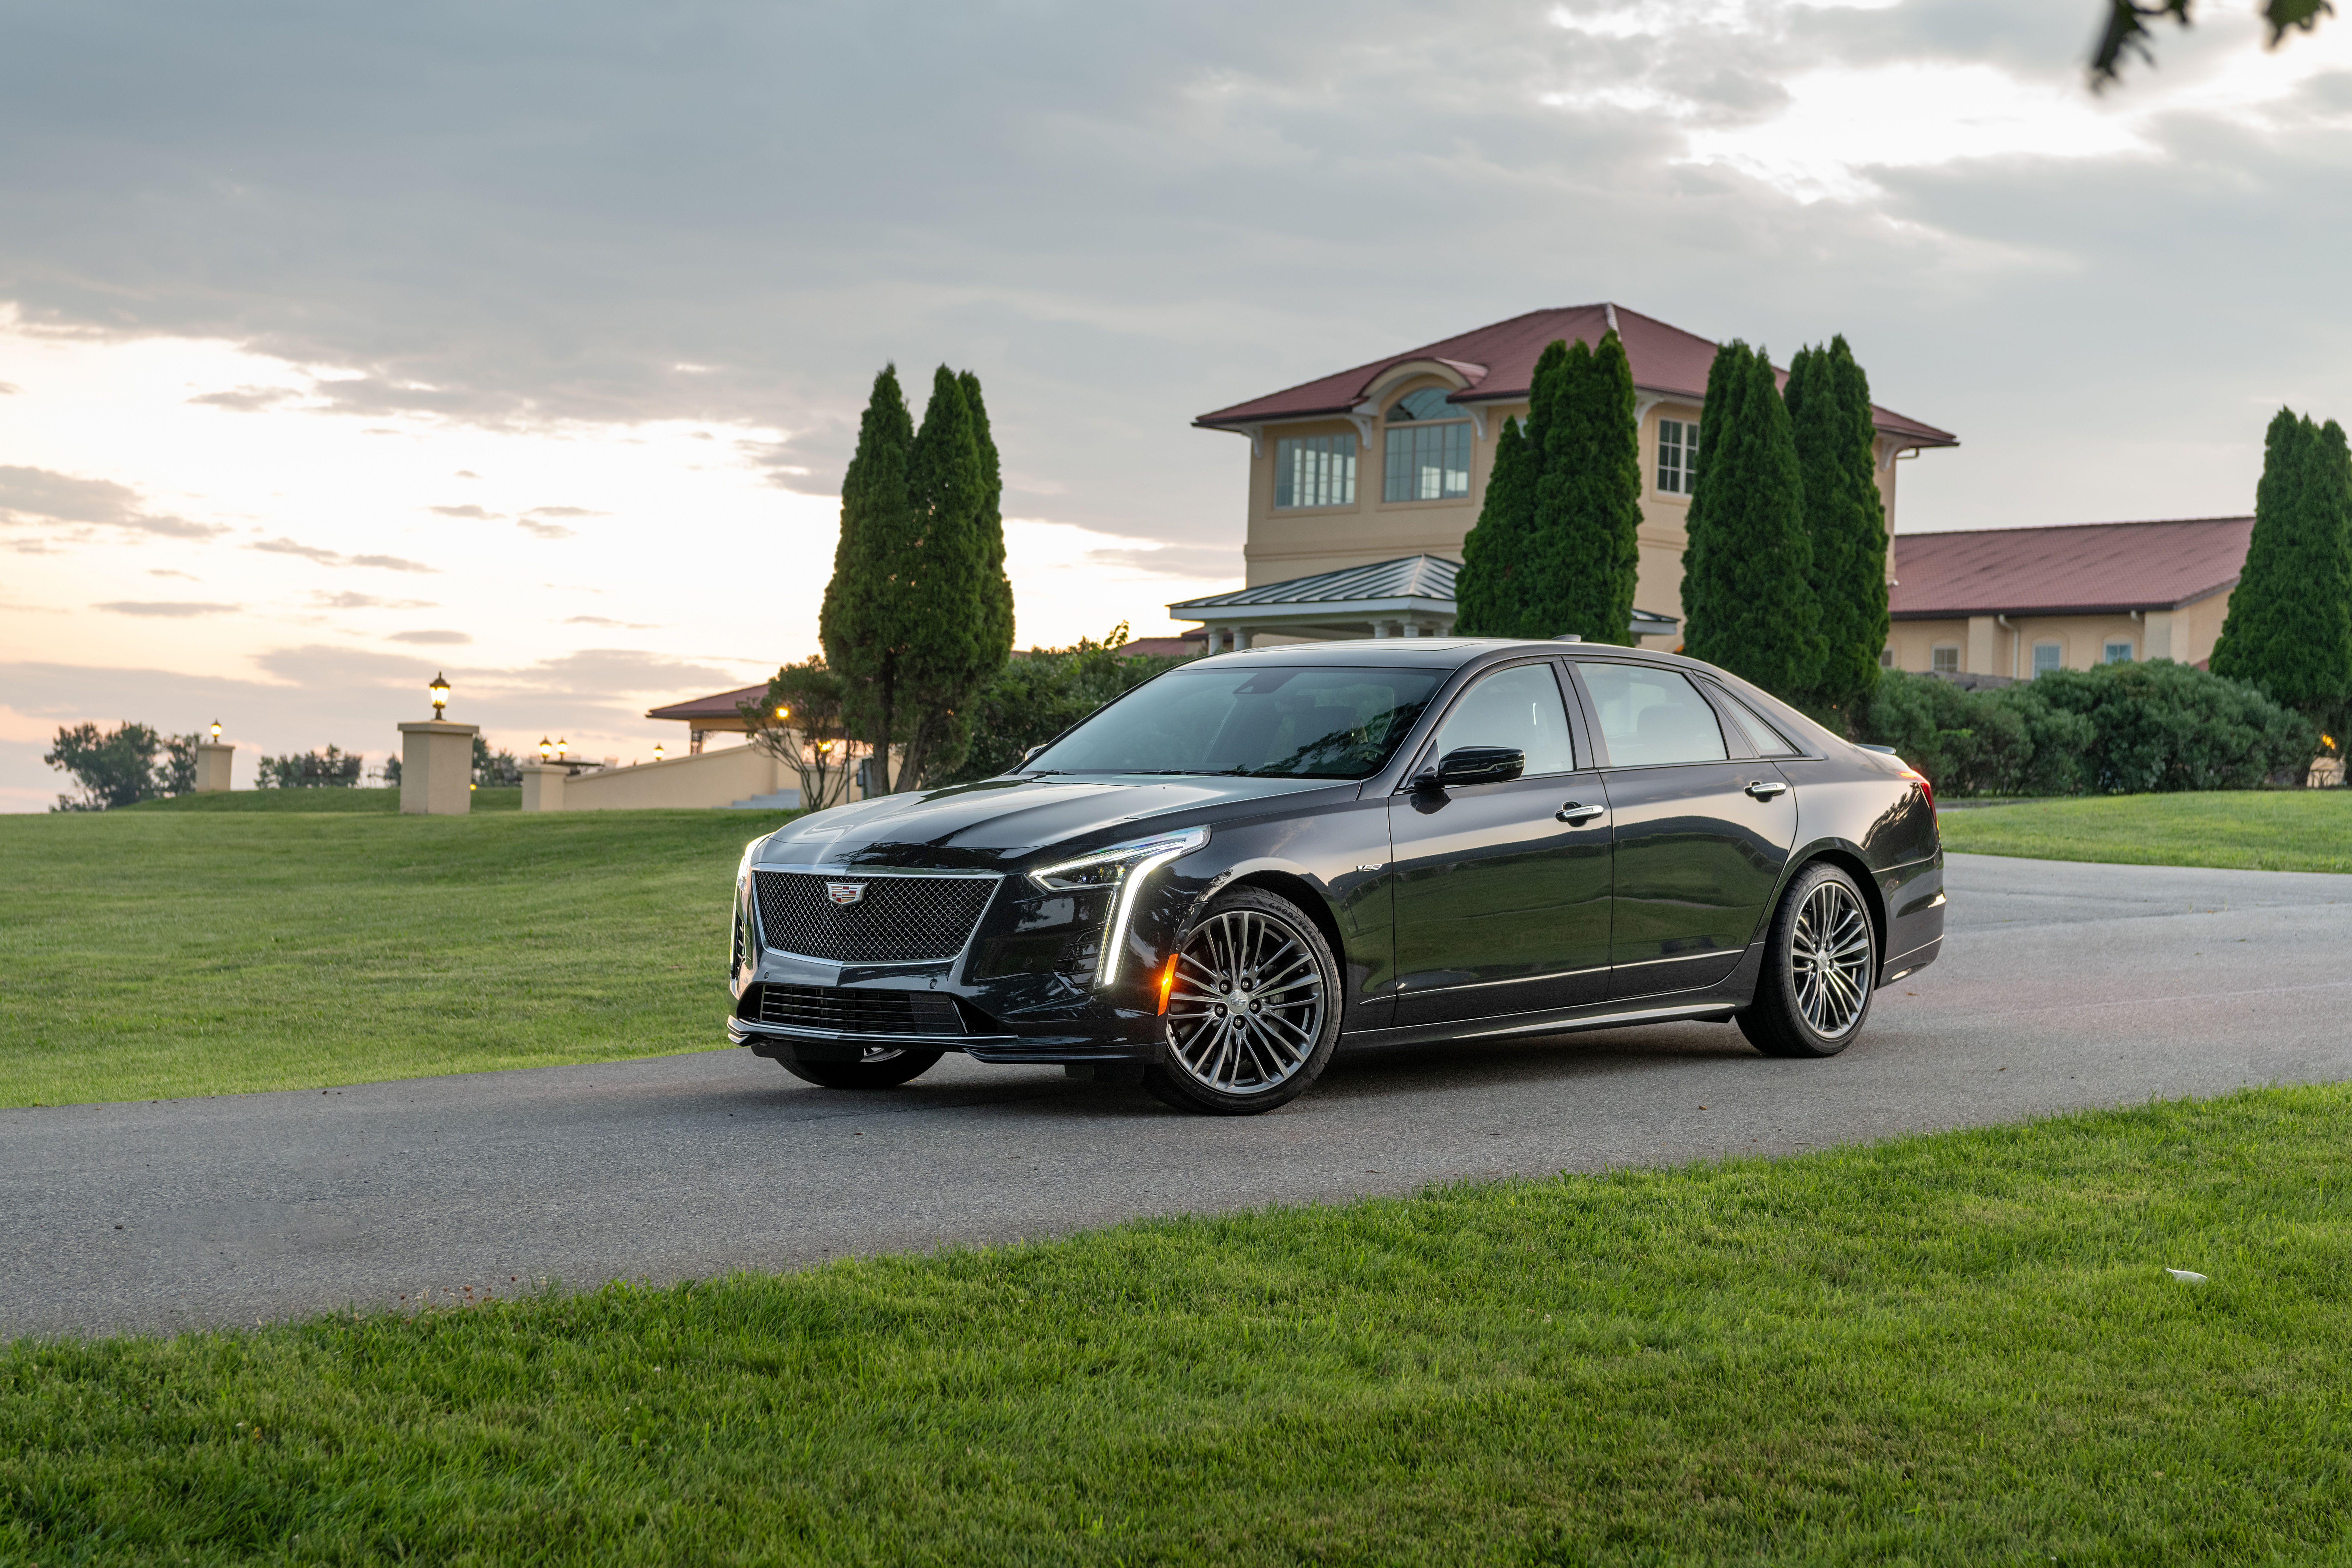 Used 2020 Cadillac CT6 for Sale Near Me